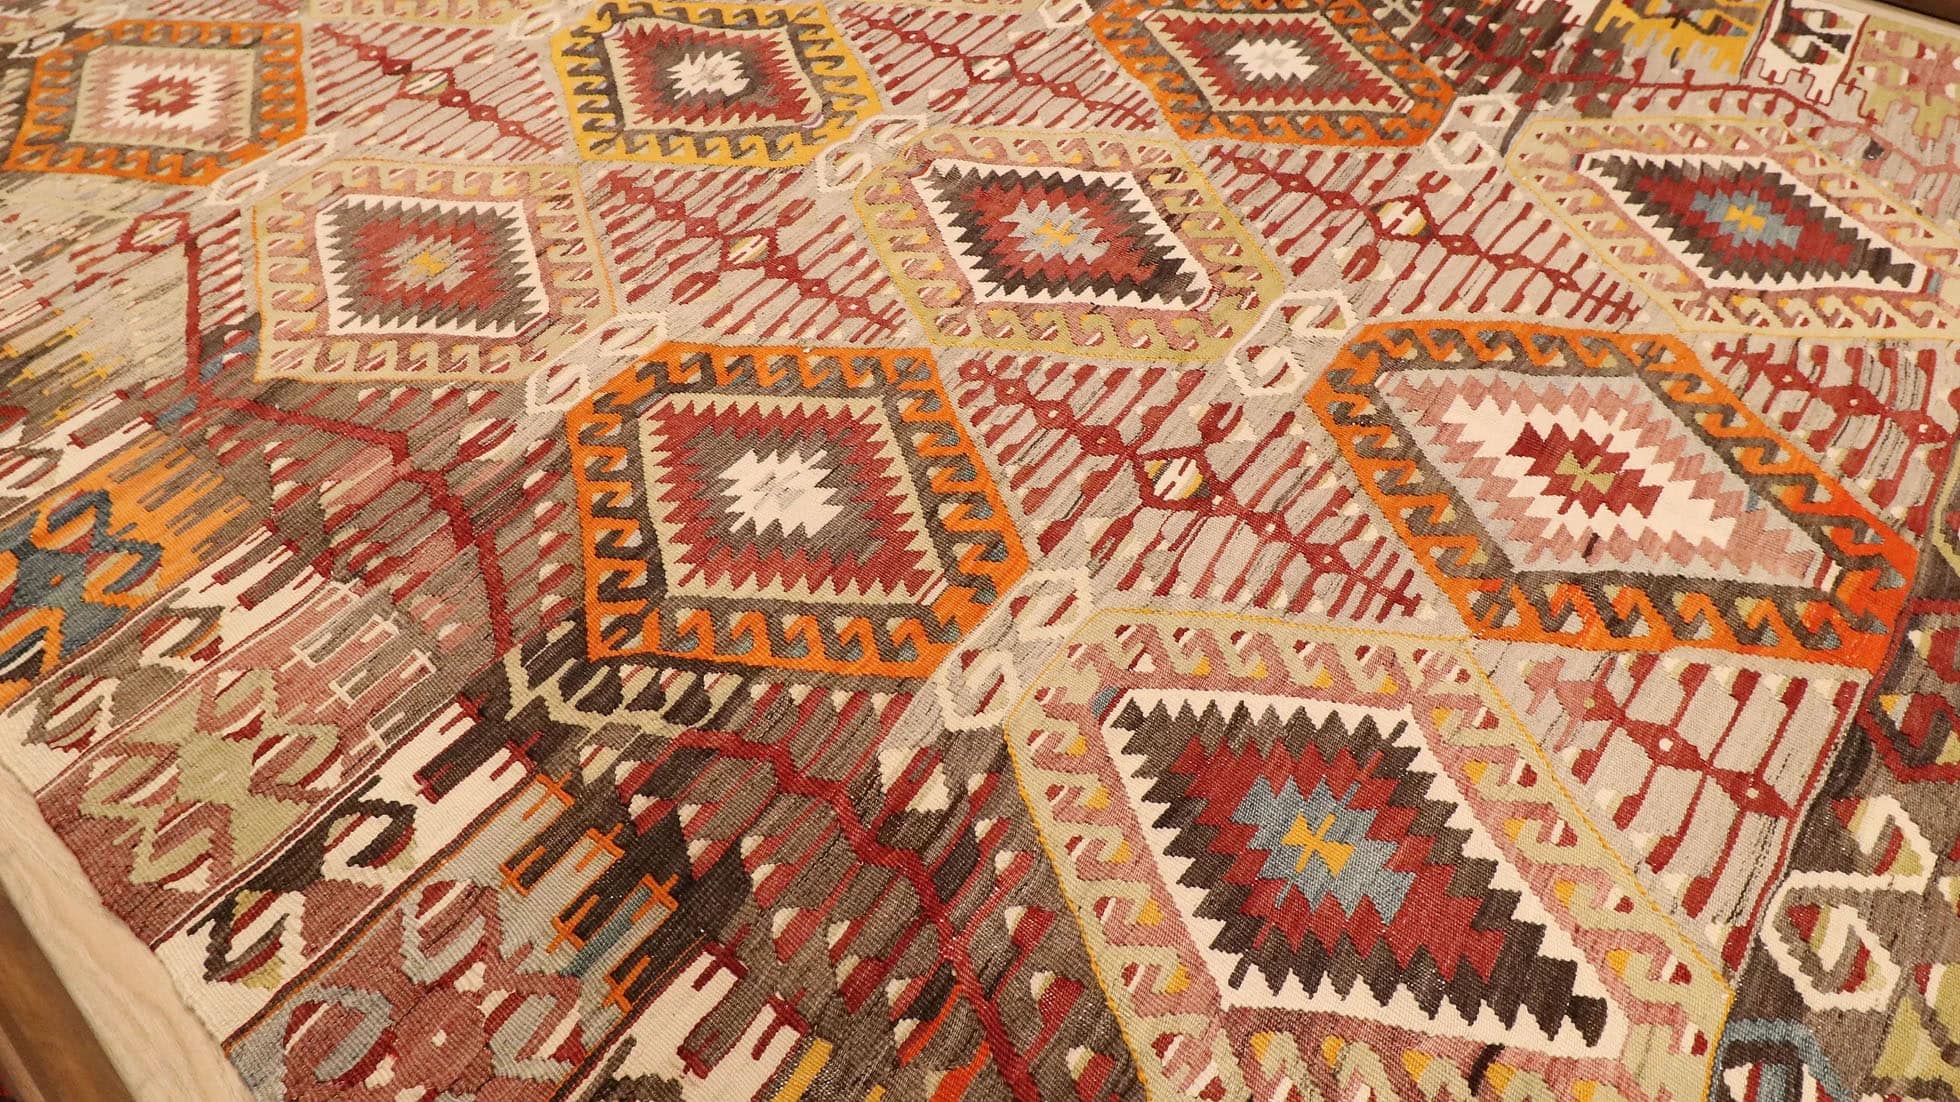 vintage handwoven Turkish rustic kilim rug in muted neutral hues and tribal motifs by Kilim Couture New York rug gallery